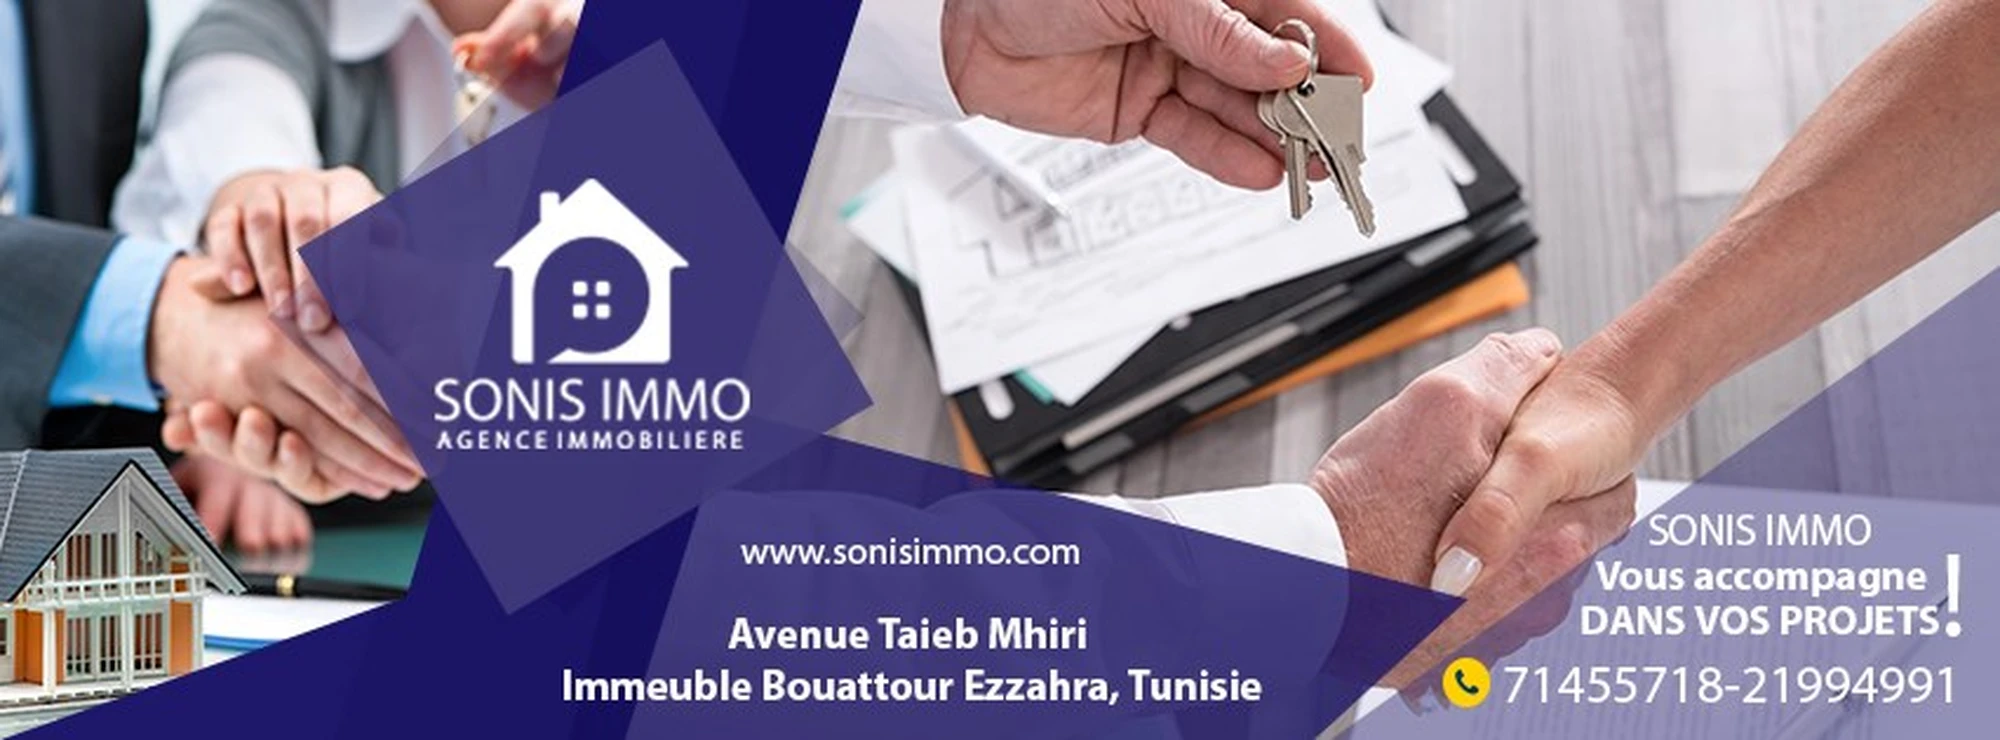 tayara shop cover of    AGENCE  IMMOBILIERE SONIS IMMO